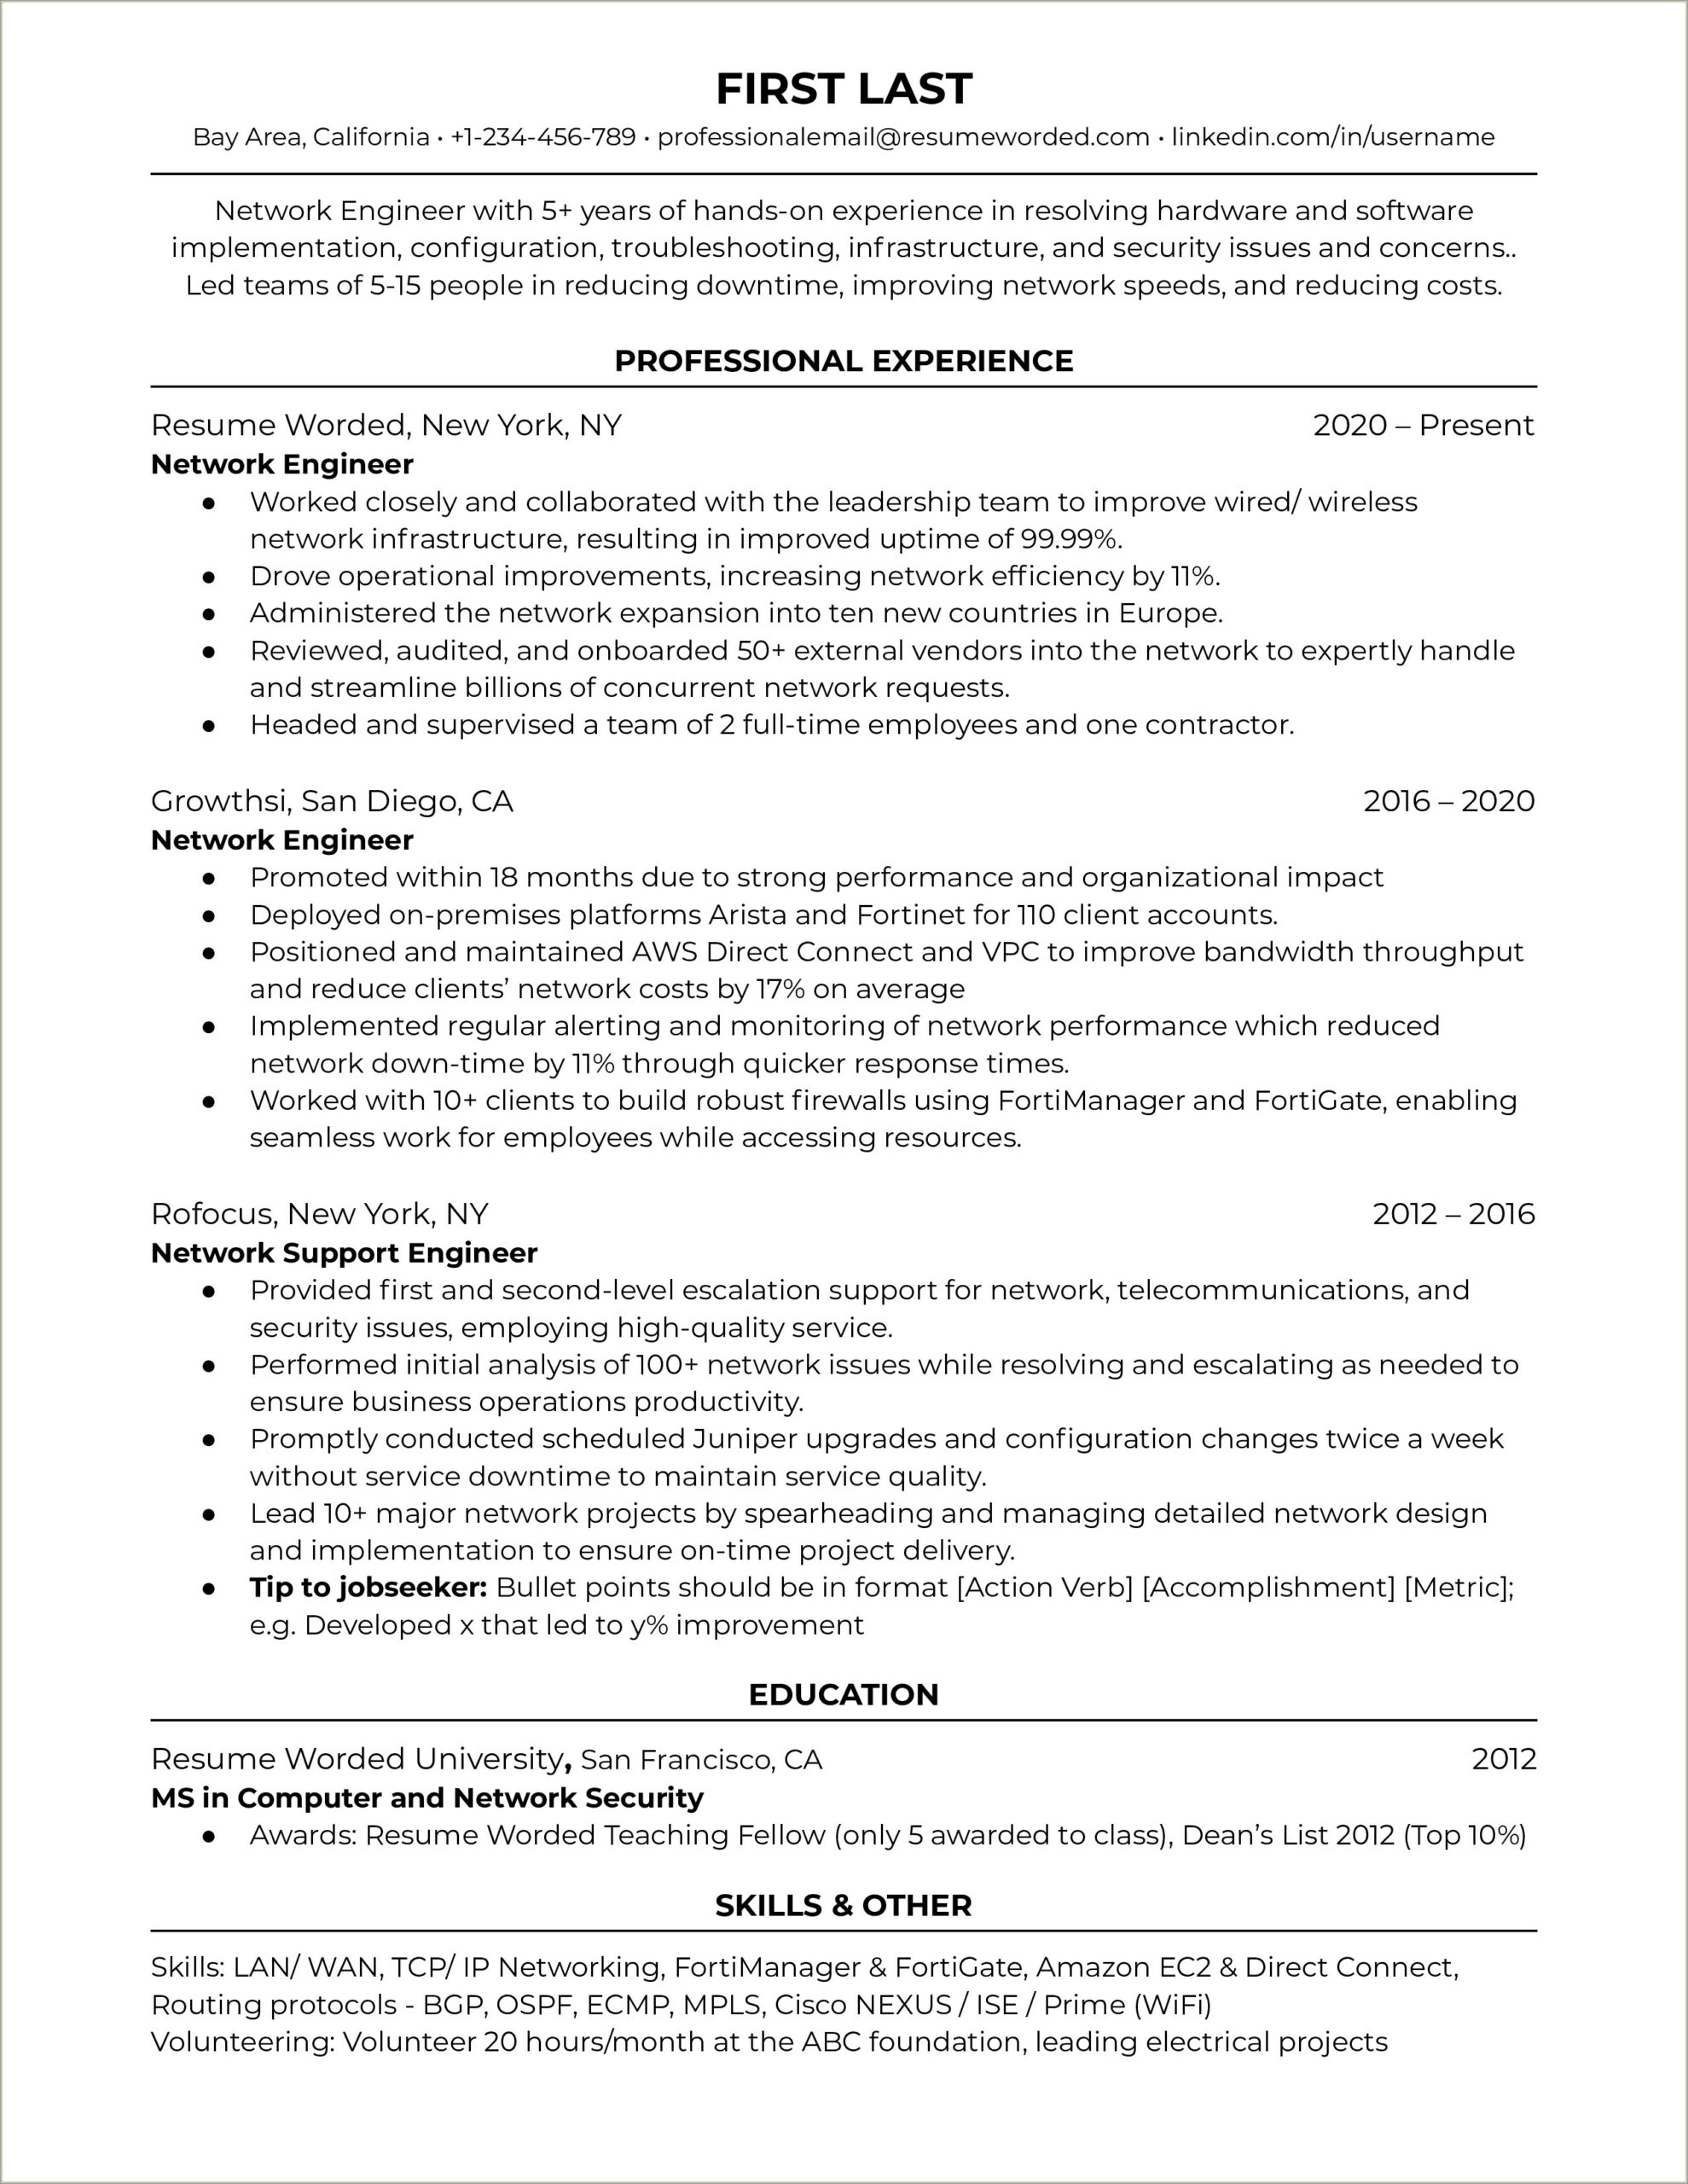 Resume For Electrical Engineer With 6 Years Experience